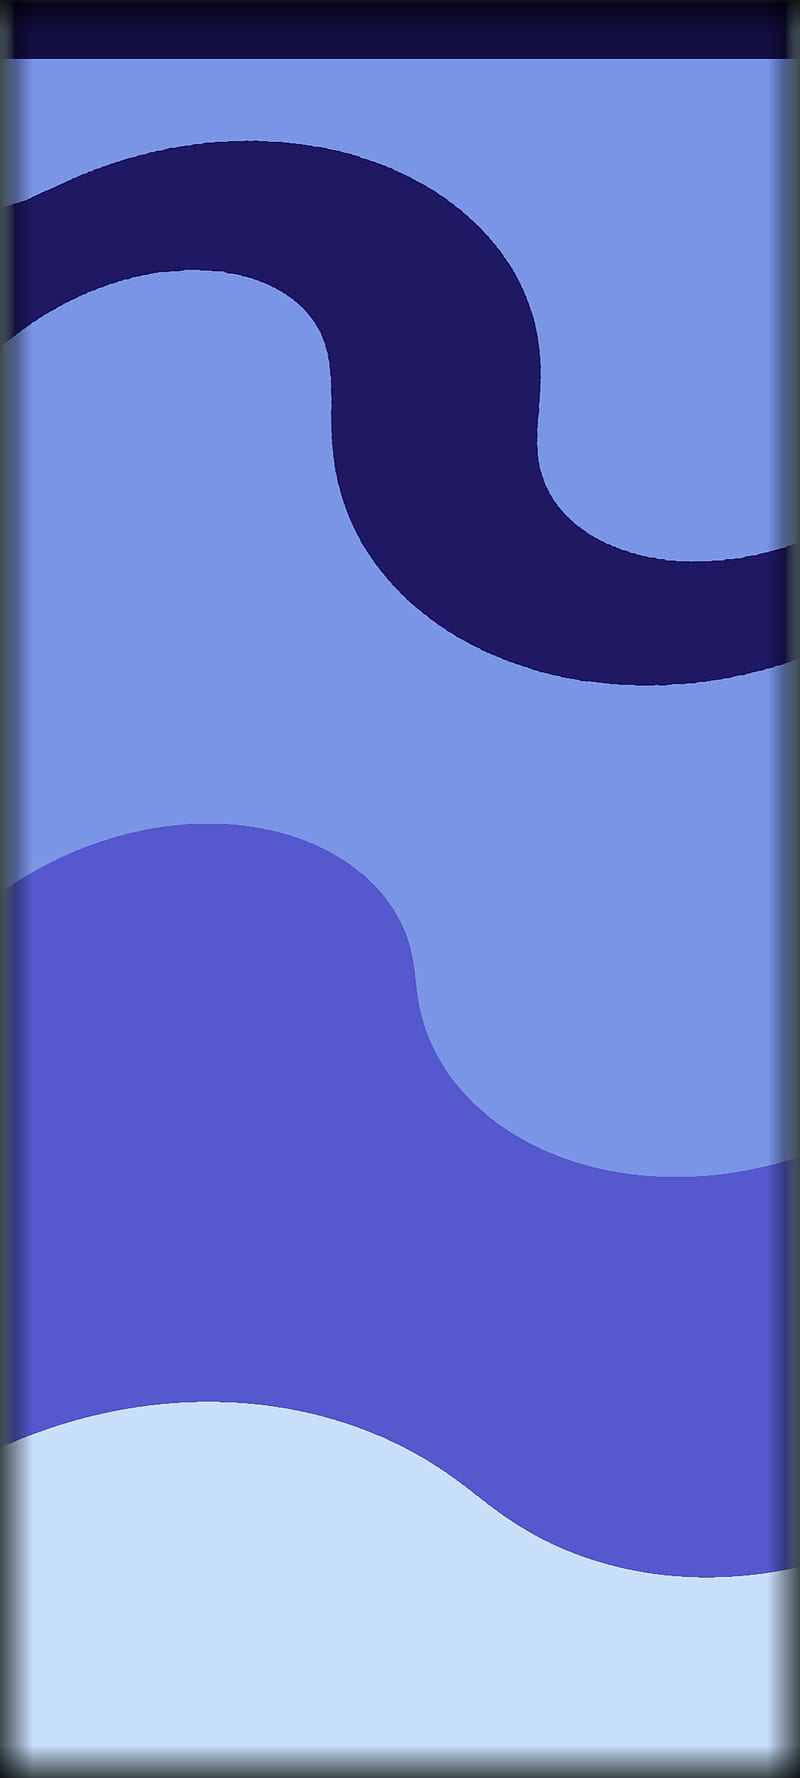 Swedish Wave Design, Samsung Galaxy, Artwork, Award Winner, Cool, Vintage, High Definition, Super, Locked Screen, , Special, New S20.Android13, A51, waves, Blue, Druffix, Gigaset, Apple iPhone, 2021, iPhoneX, M32, Magma, Modern Style, 5G, Love, contrast, purple, Edge, Nokia, HD phone wallpaper